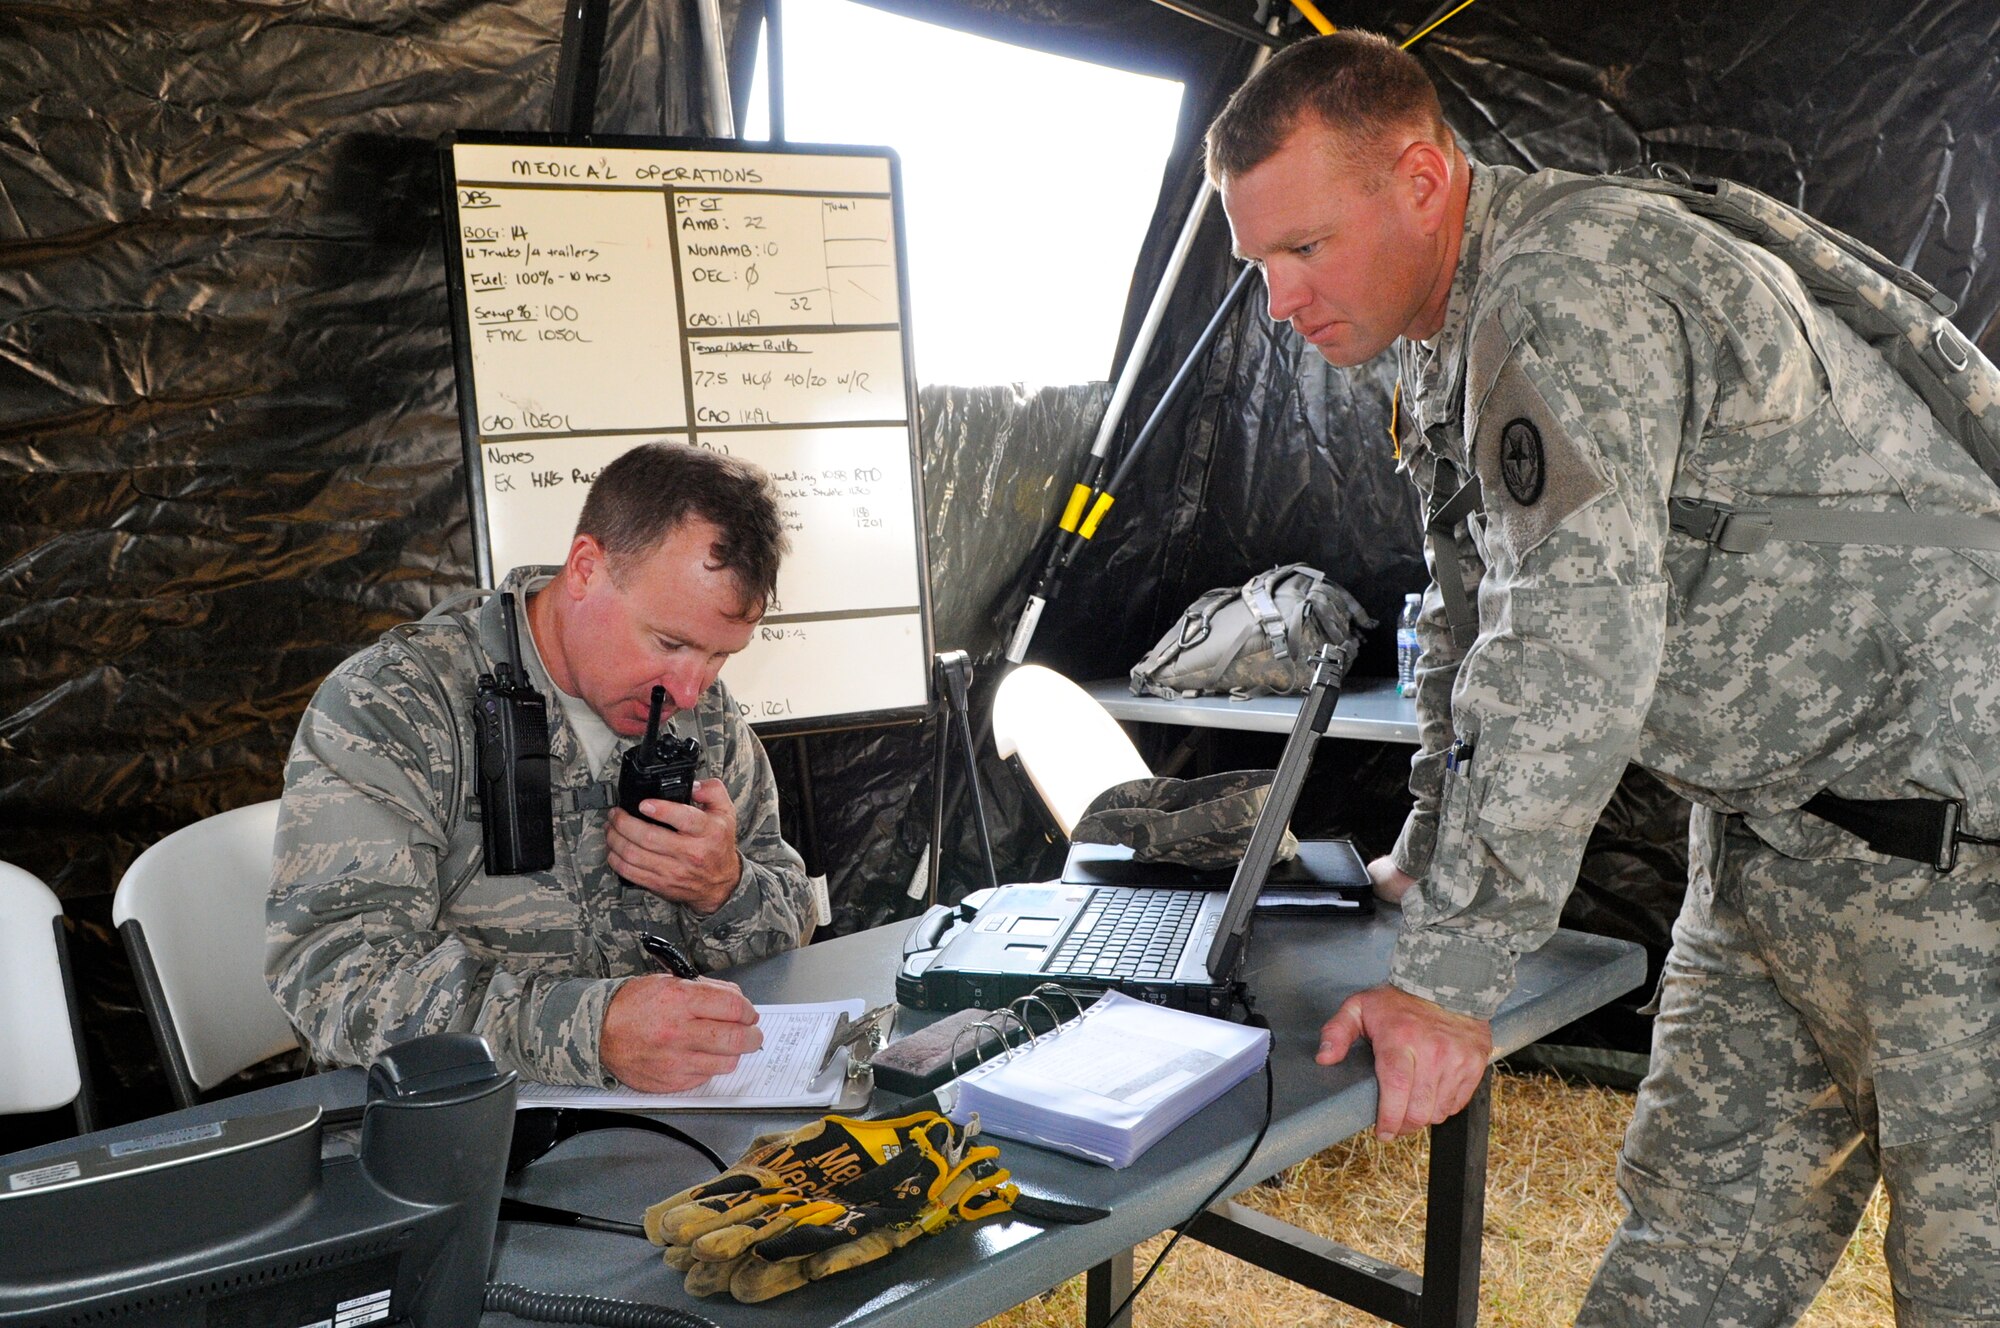 Air Force Capt. Wayne Hill (left), a medical plans and operations officer, coordinates activities as the officer-in-charge of the air medical operations with Army Staff Sgt. Kevin Creasy, noncommissioned officer-in-charge of 6 CERF-P tactical operations center, during an emergency preparedness exercise in Austin, Texas, on Apr. 26, 2012. (Air National Guard photo by Senior Master Sgt. Mike Arellano / Released)